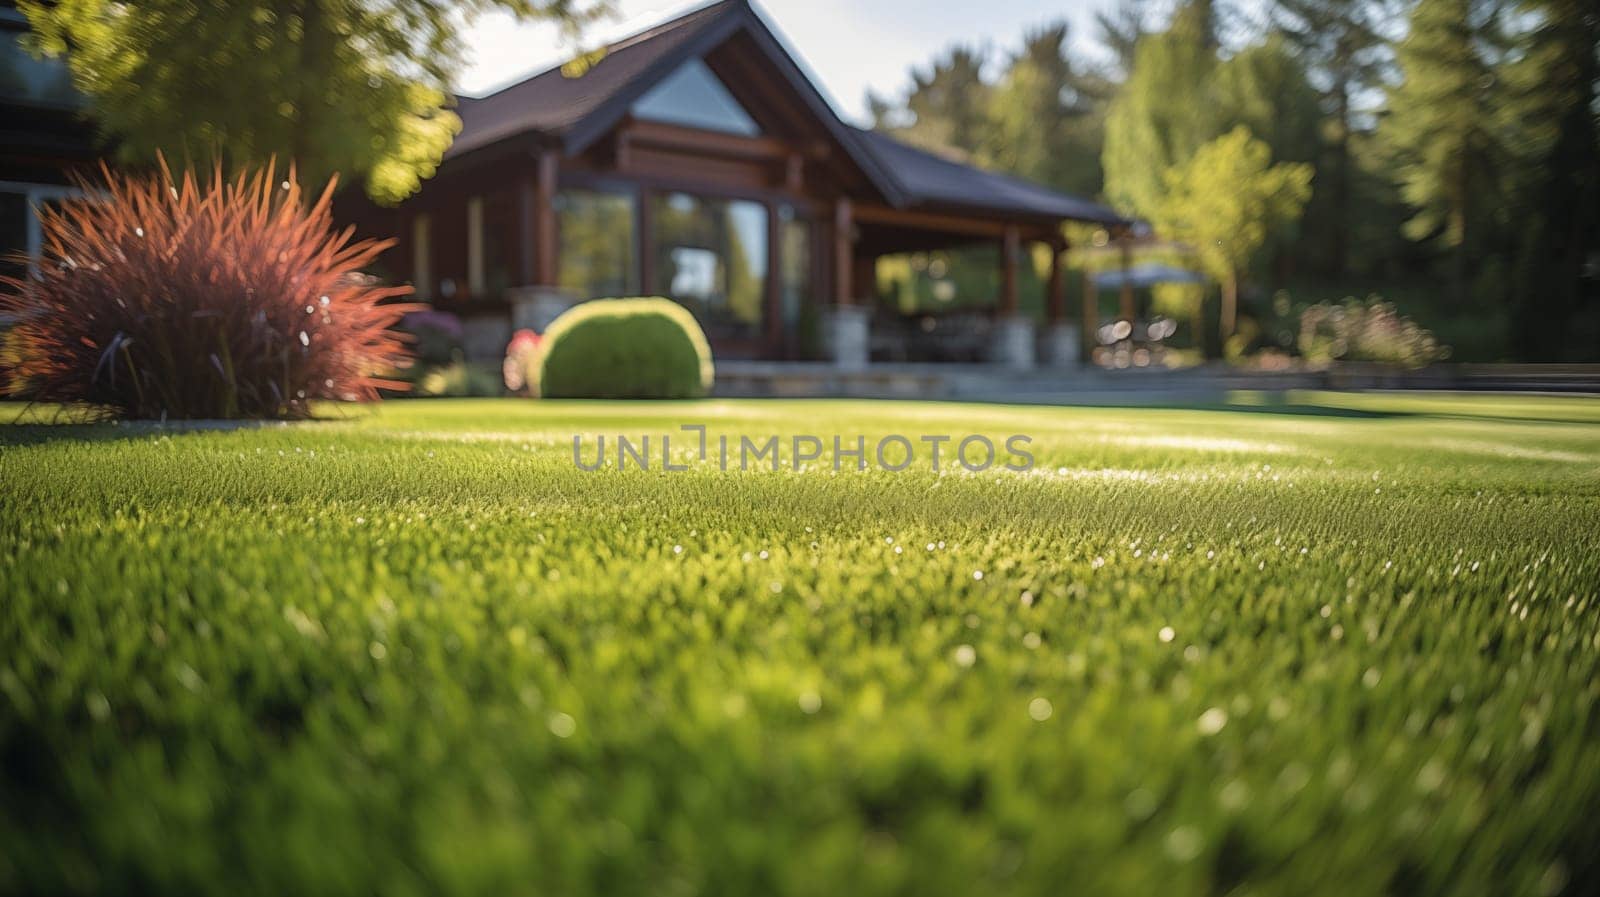 A foreground focus on a dew-kissed, well-trimmed lawn with a luxurious home softly blurred in the background, bathed in the warm glow of the setting sun.